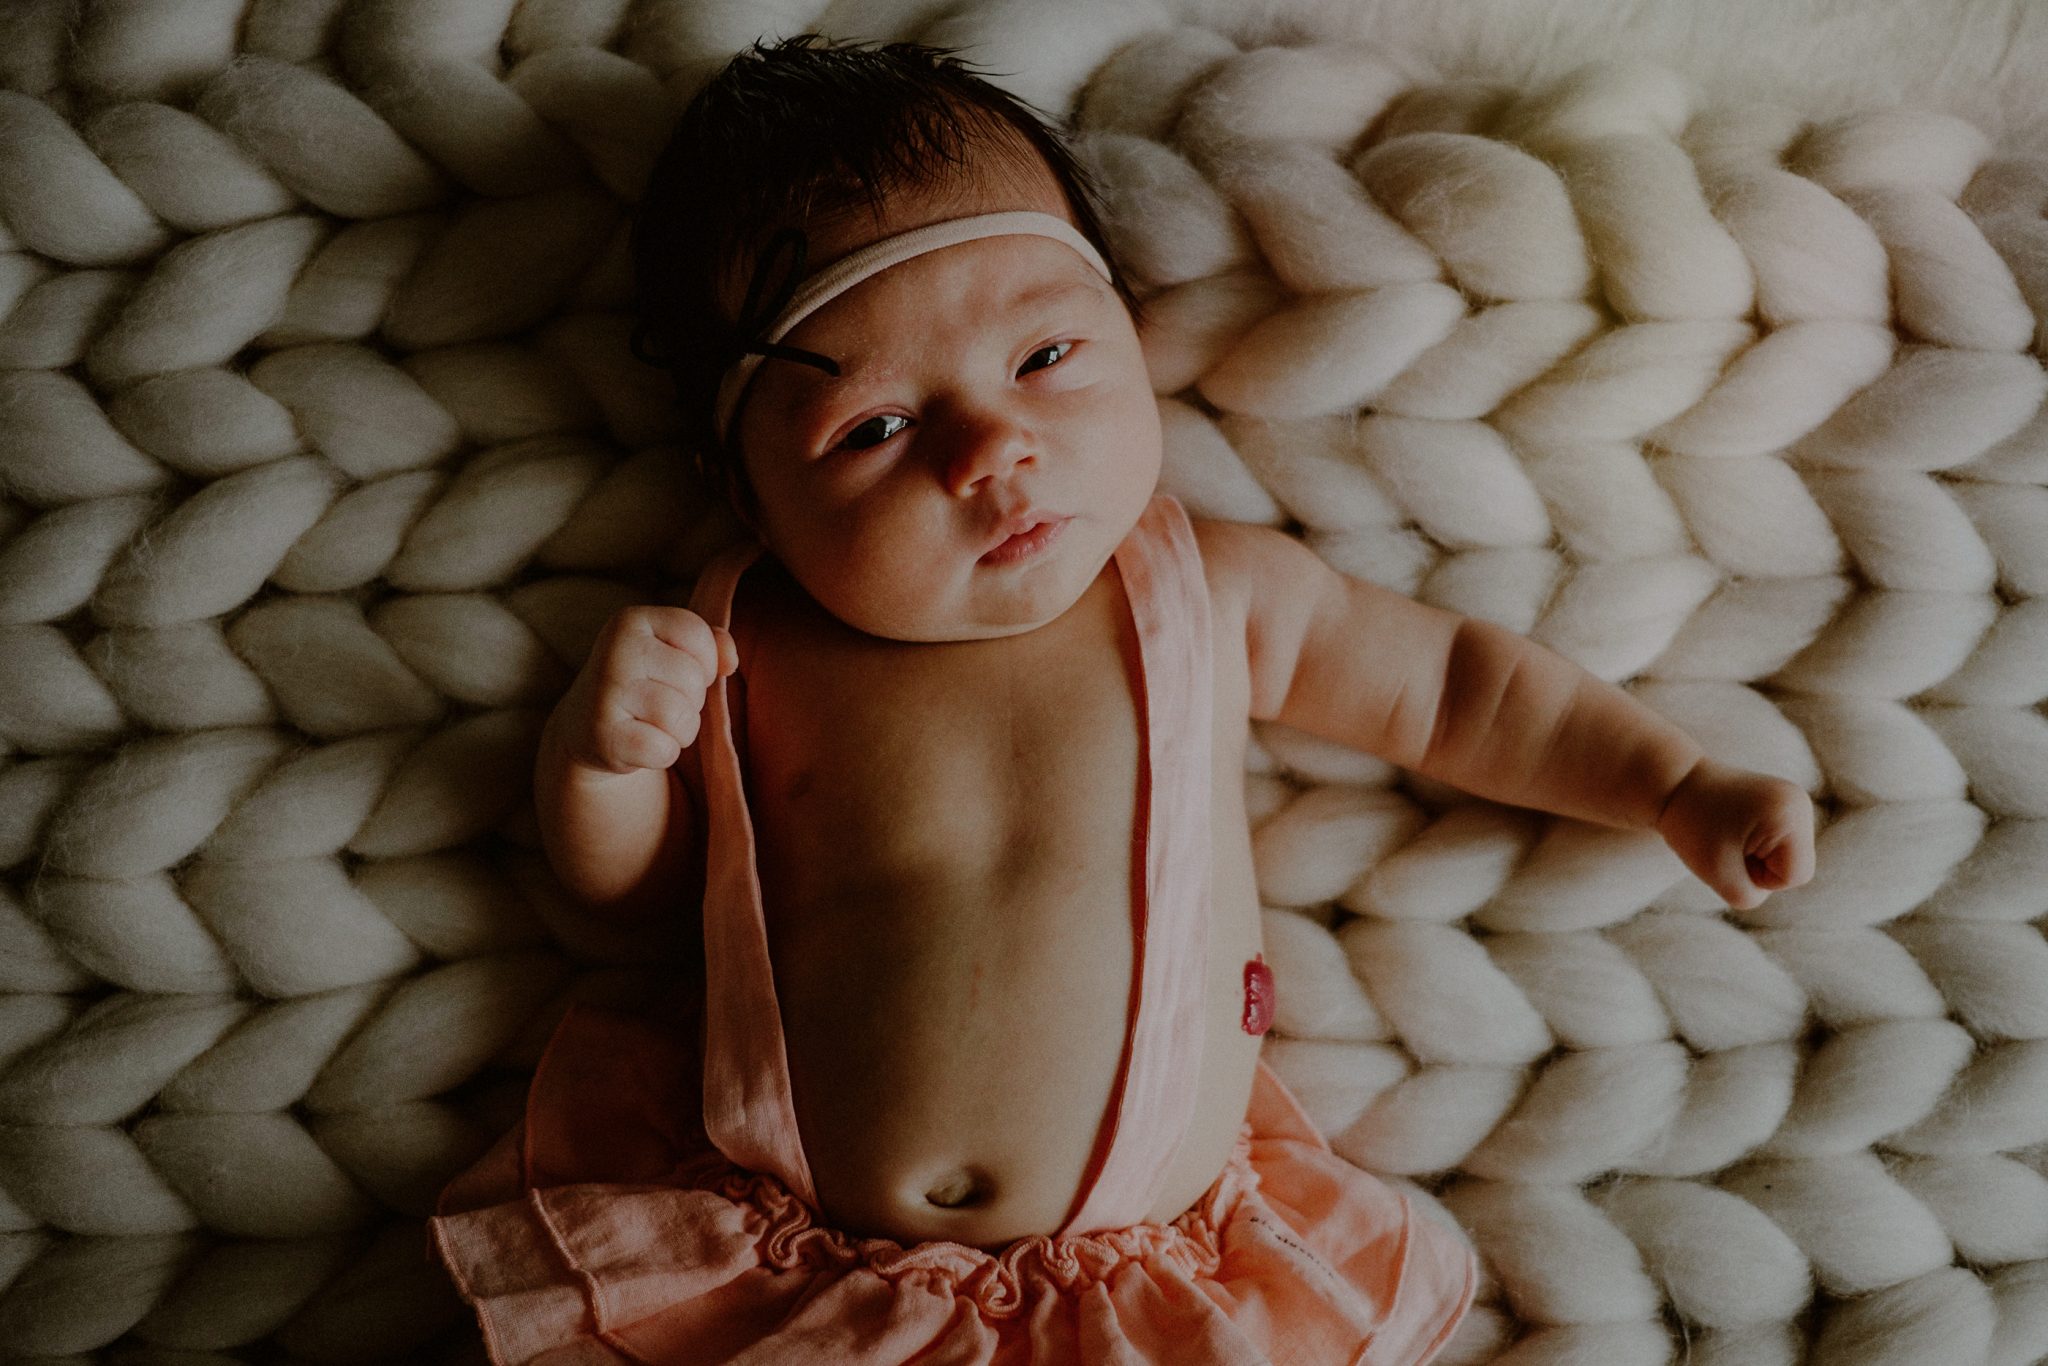 newborn baby photo with baby looking directly at camera